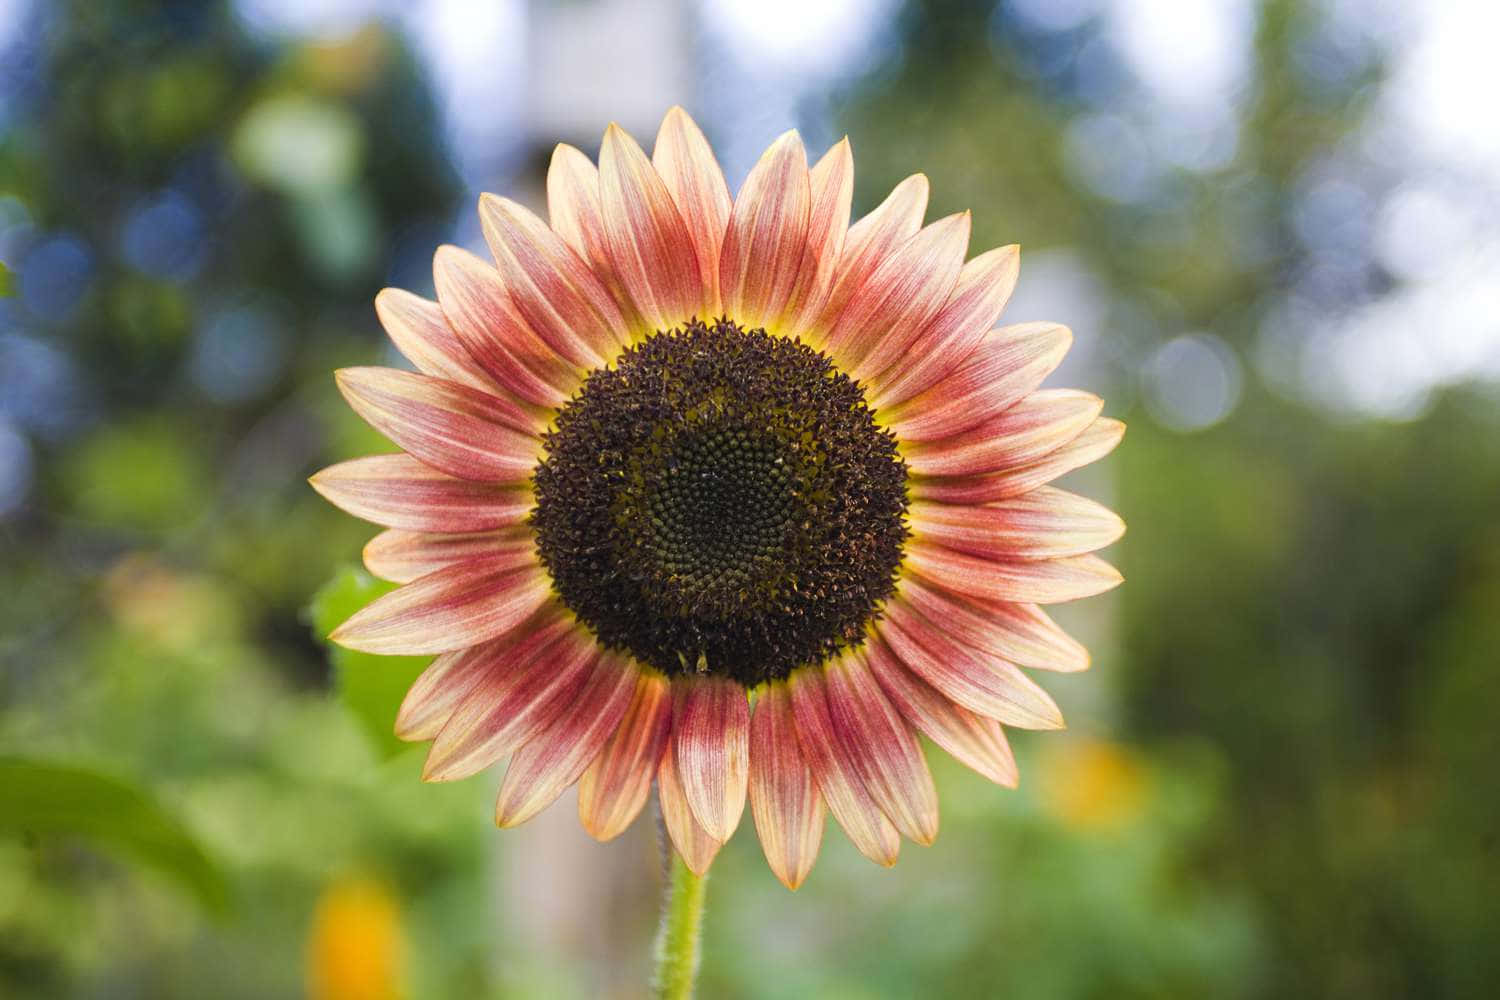 A sunflower with vibrant yellow petals basking in the sunshine.